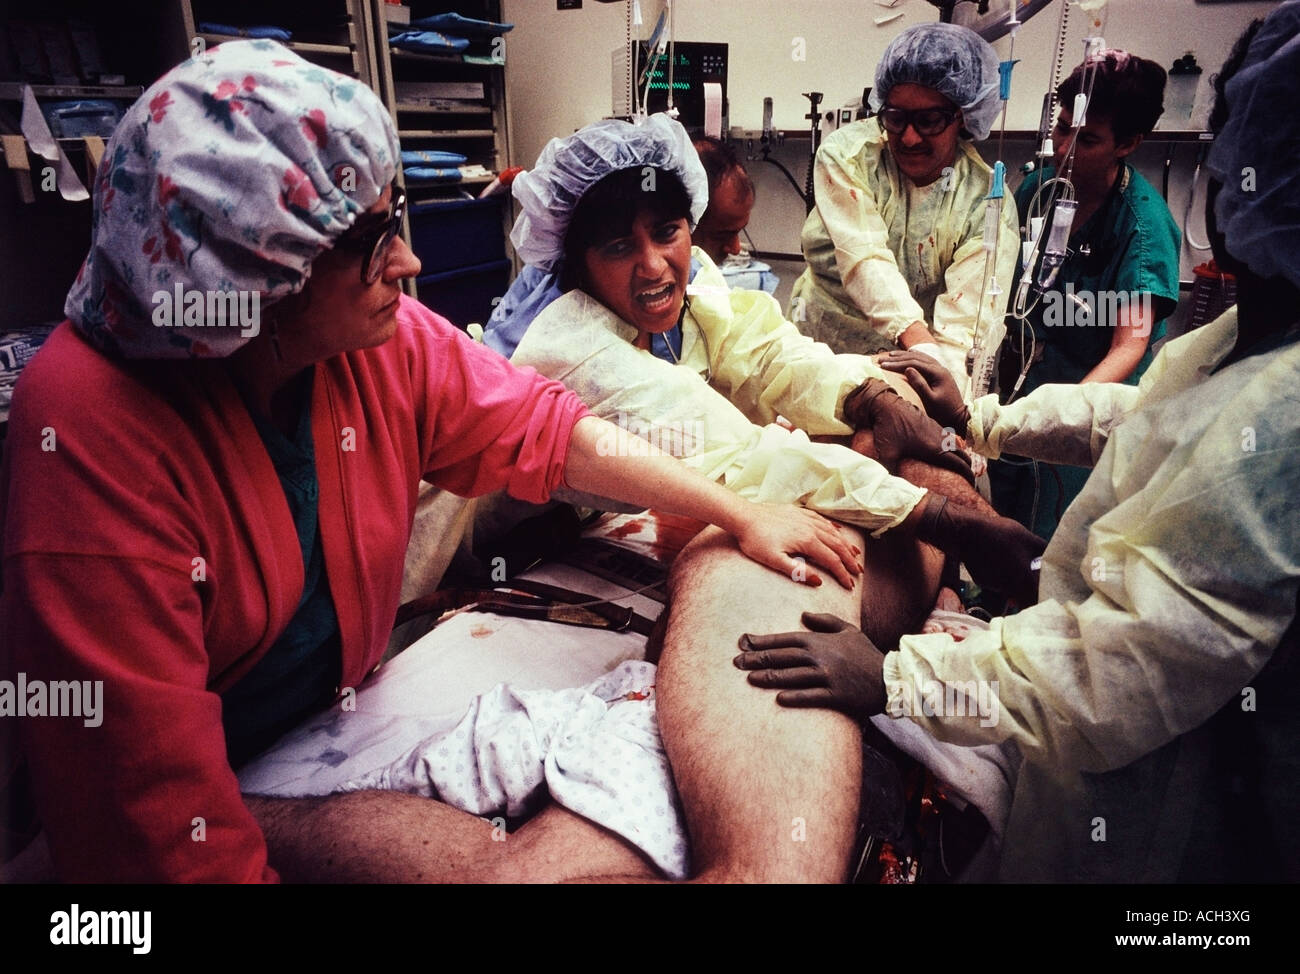 Doctors And Nurses Treat A Gunshot Victim In The Emergency Room Of A Public Hospital Photo By 